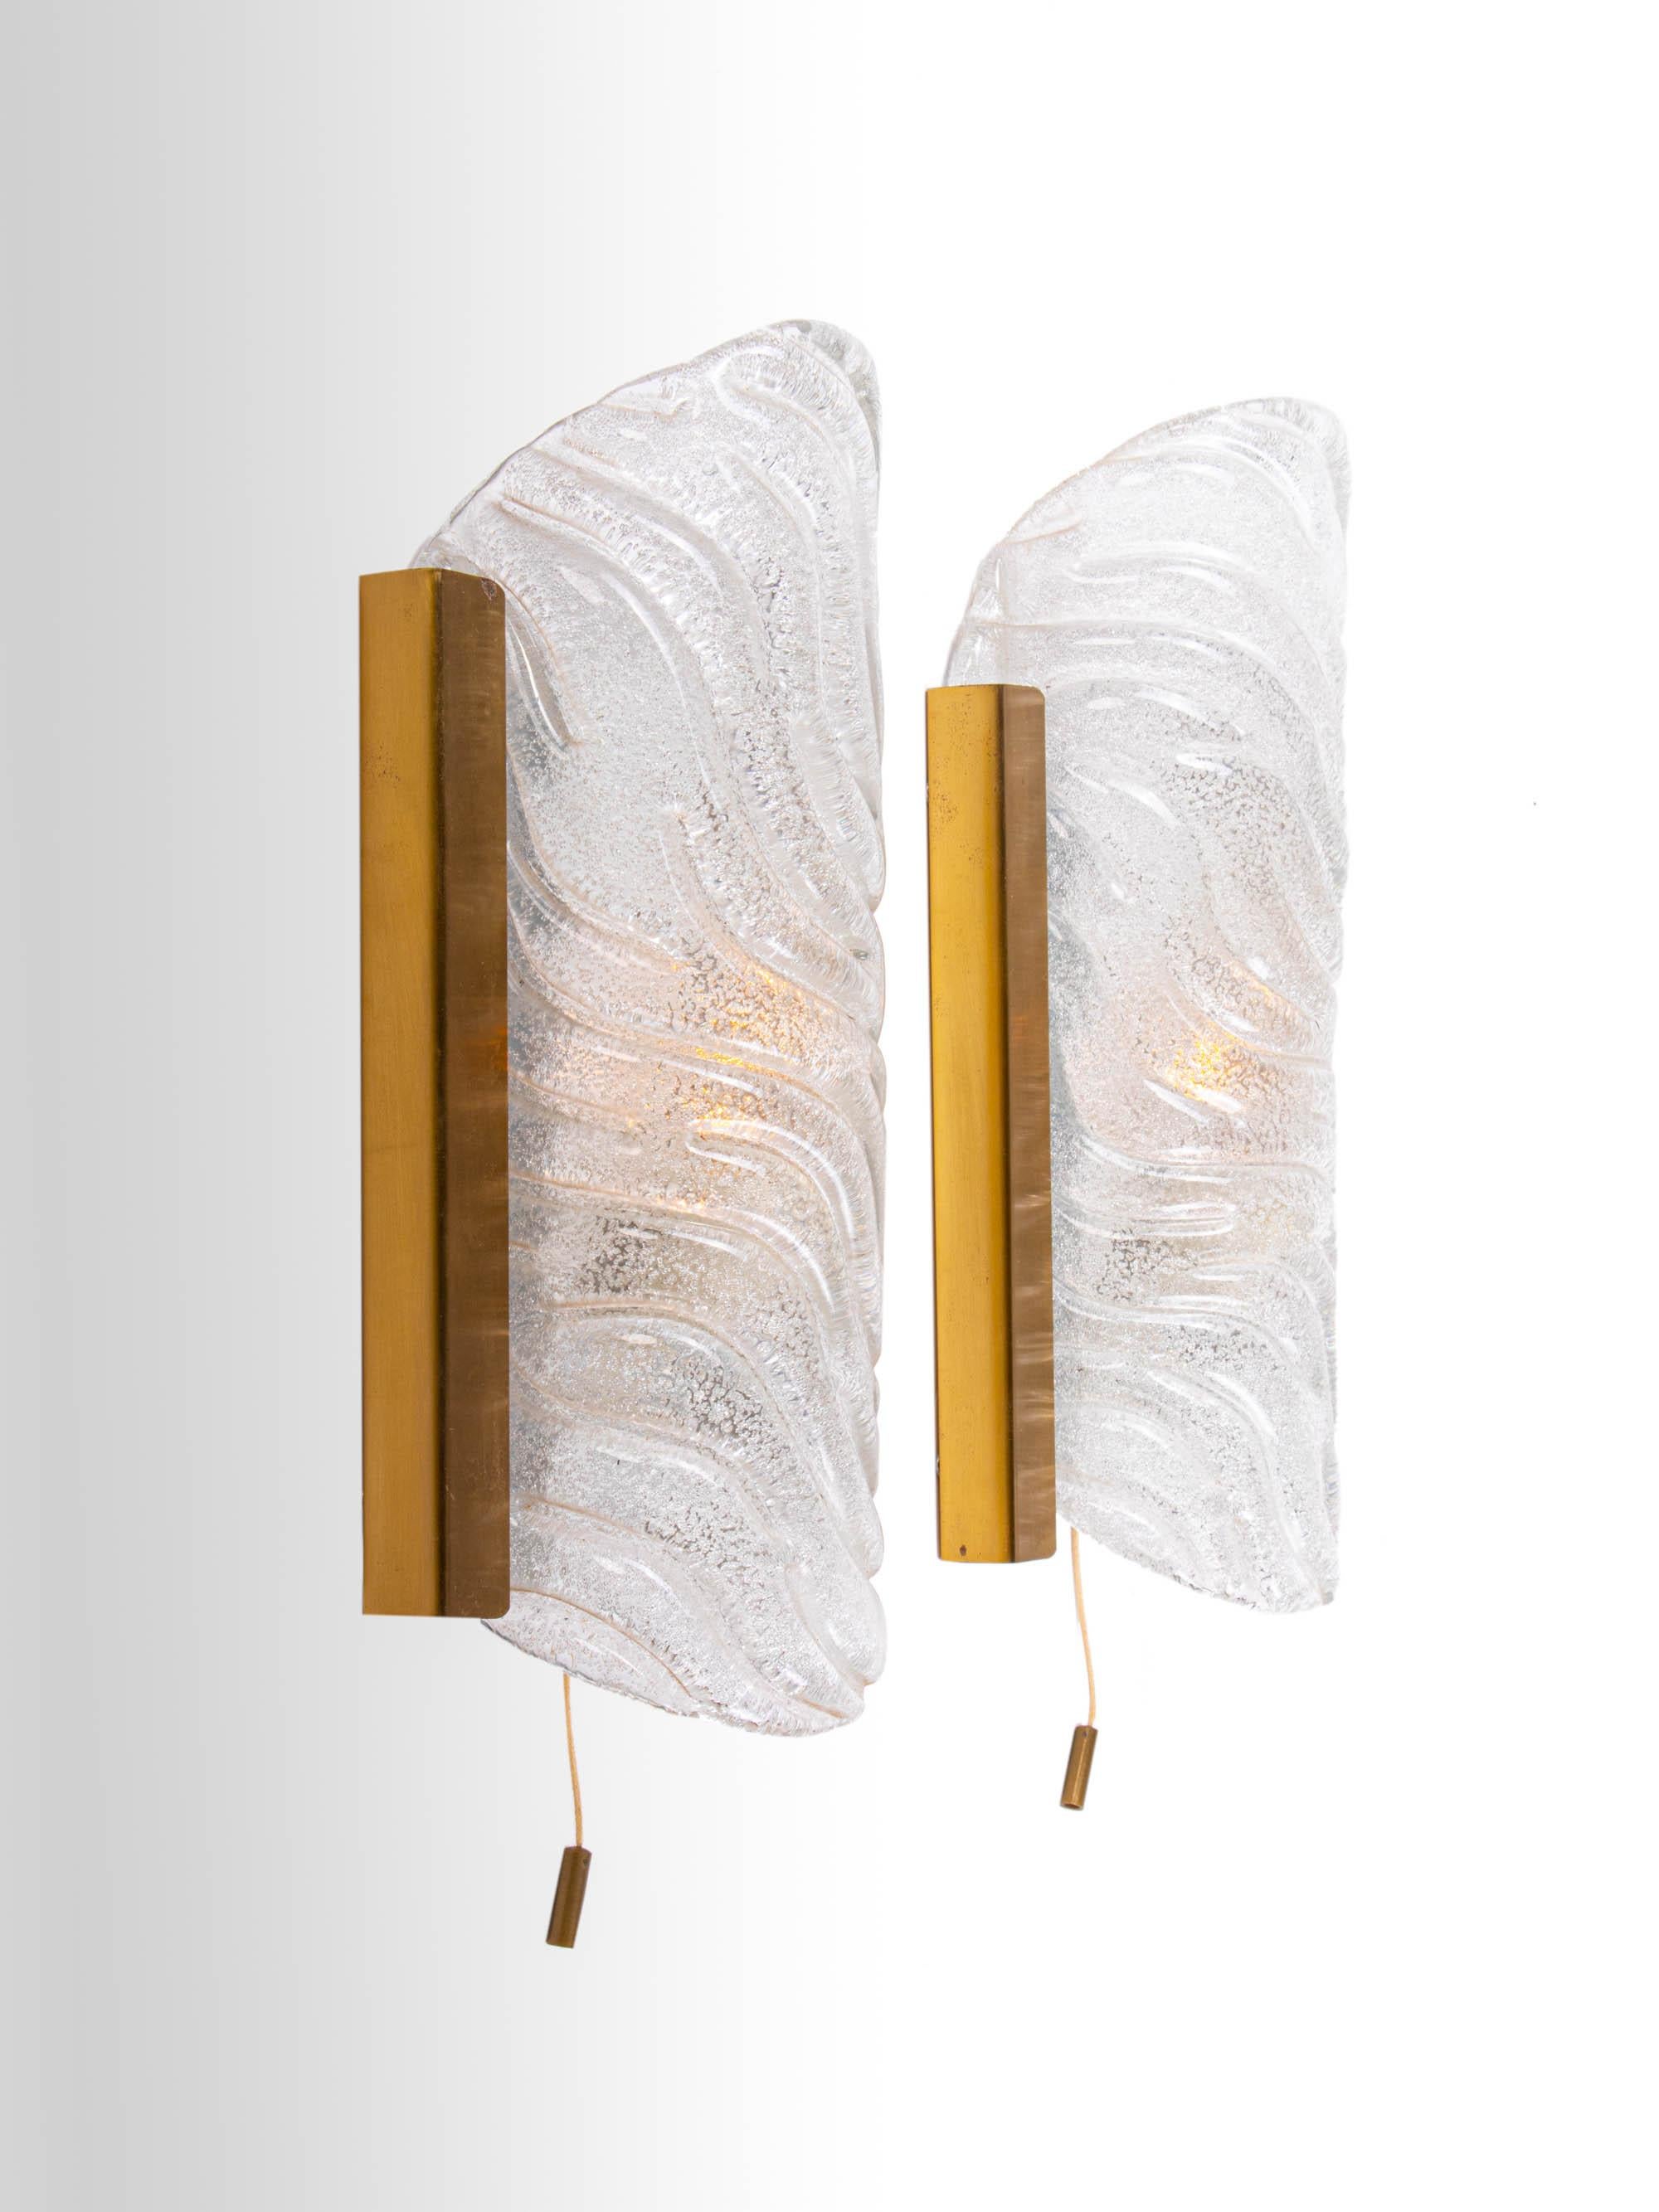 Elegant pair of modern wall sconces designed by J.T. Kalmar. Thick murano glass elements resembles icicles fixed on a golden brass frame. Each lamp emits sufficient indirect warm light. With this light you make a clear statement in your interior